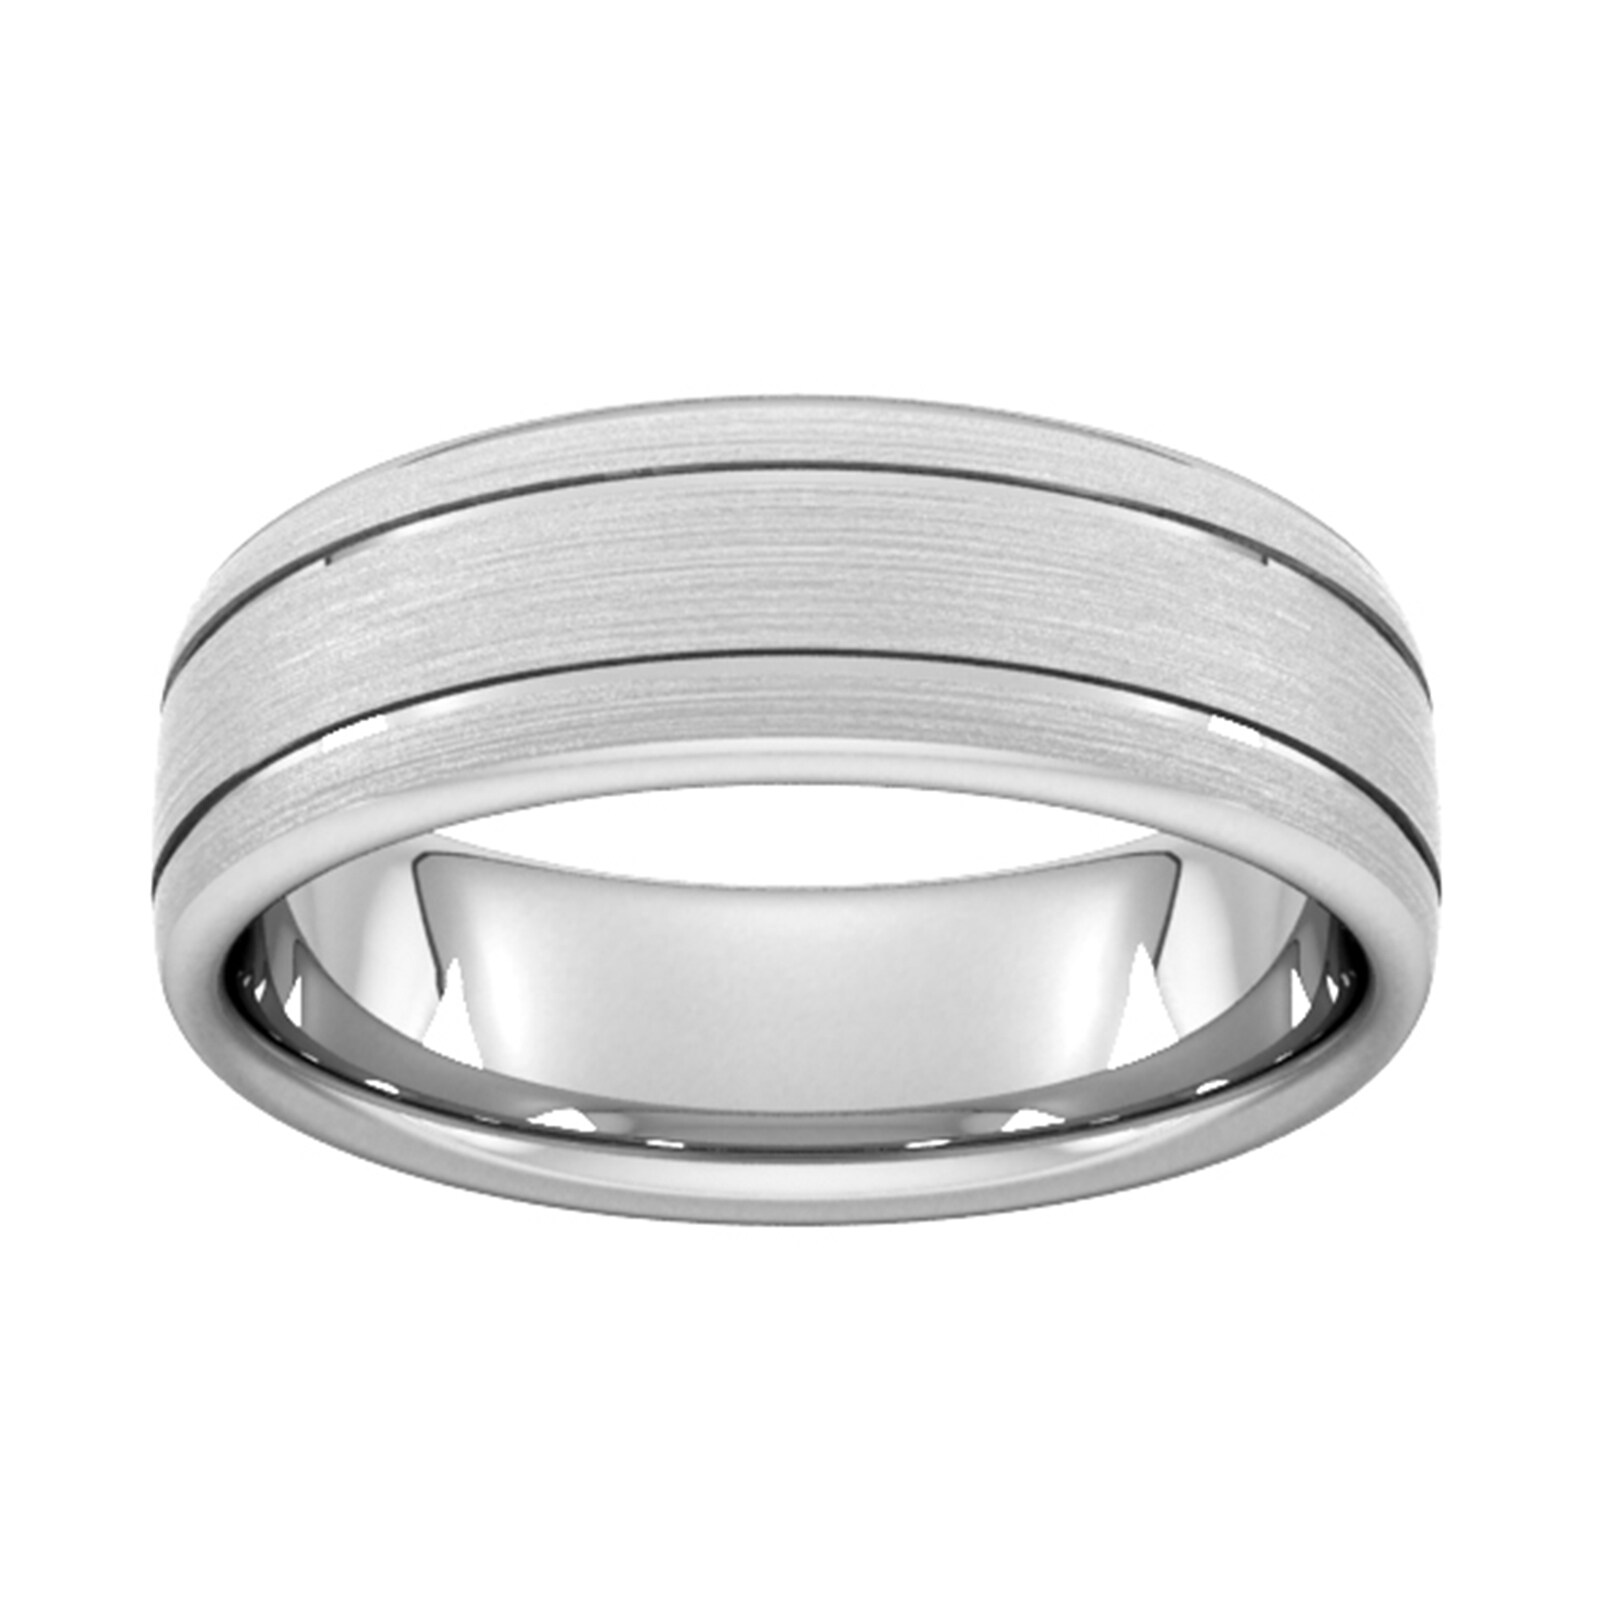 7mm Slight Court Standard Matt Finish With Double Grooves Wedding Ring In 18 Carat White Gold - Ring Size T